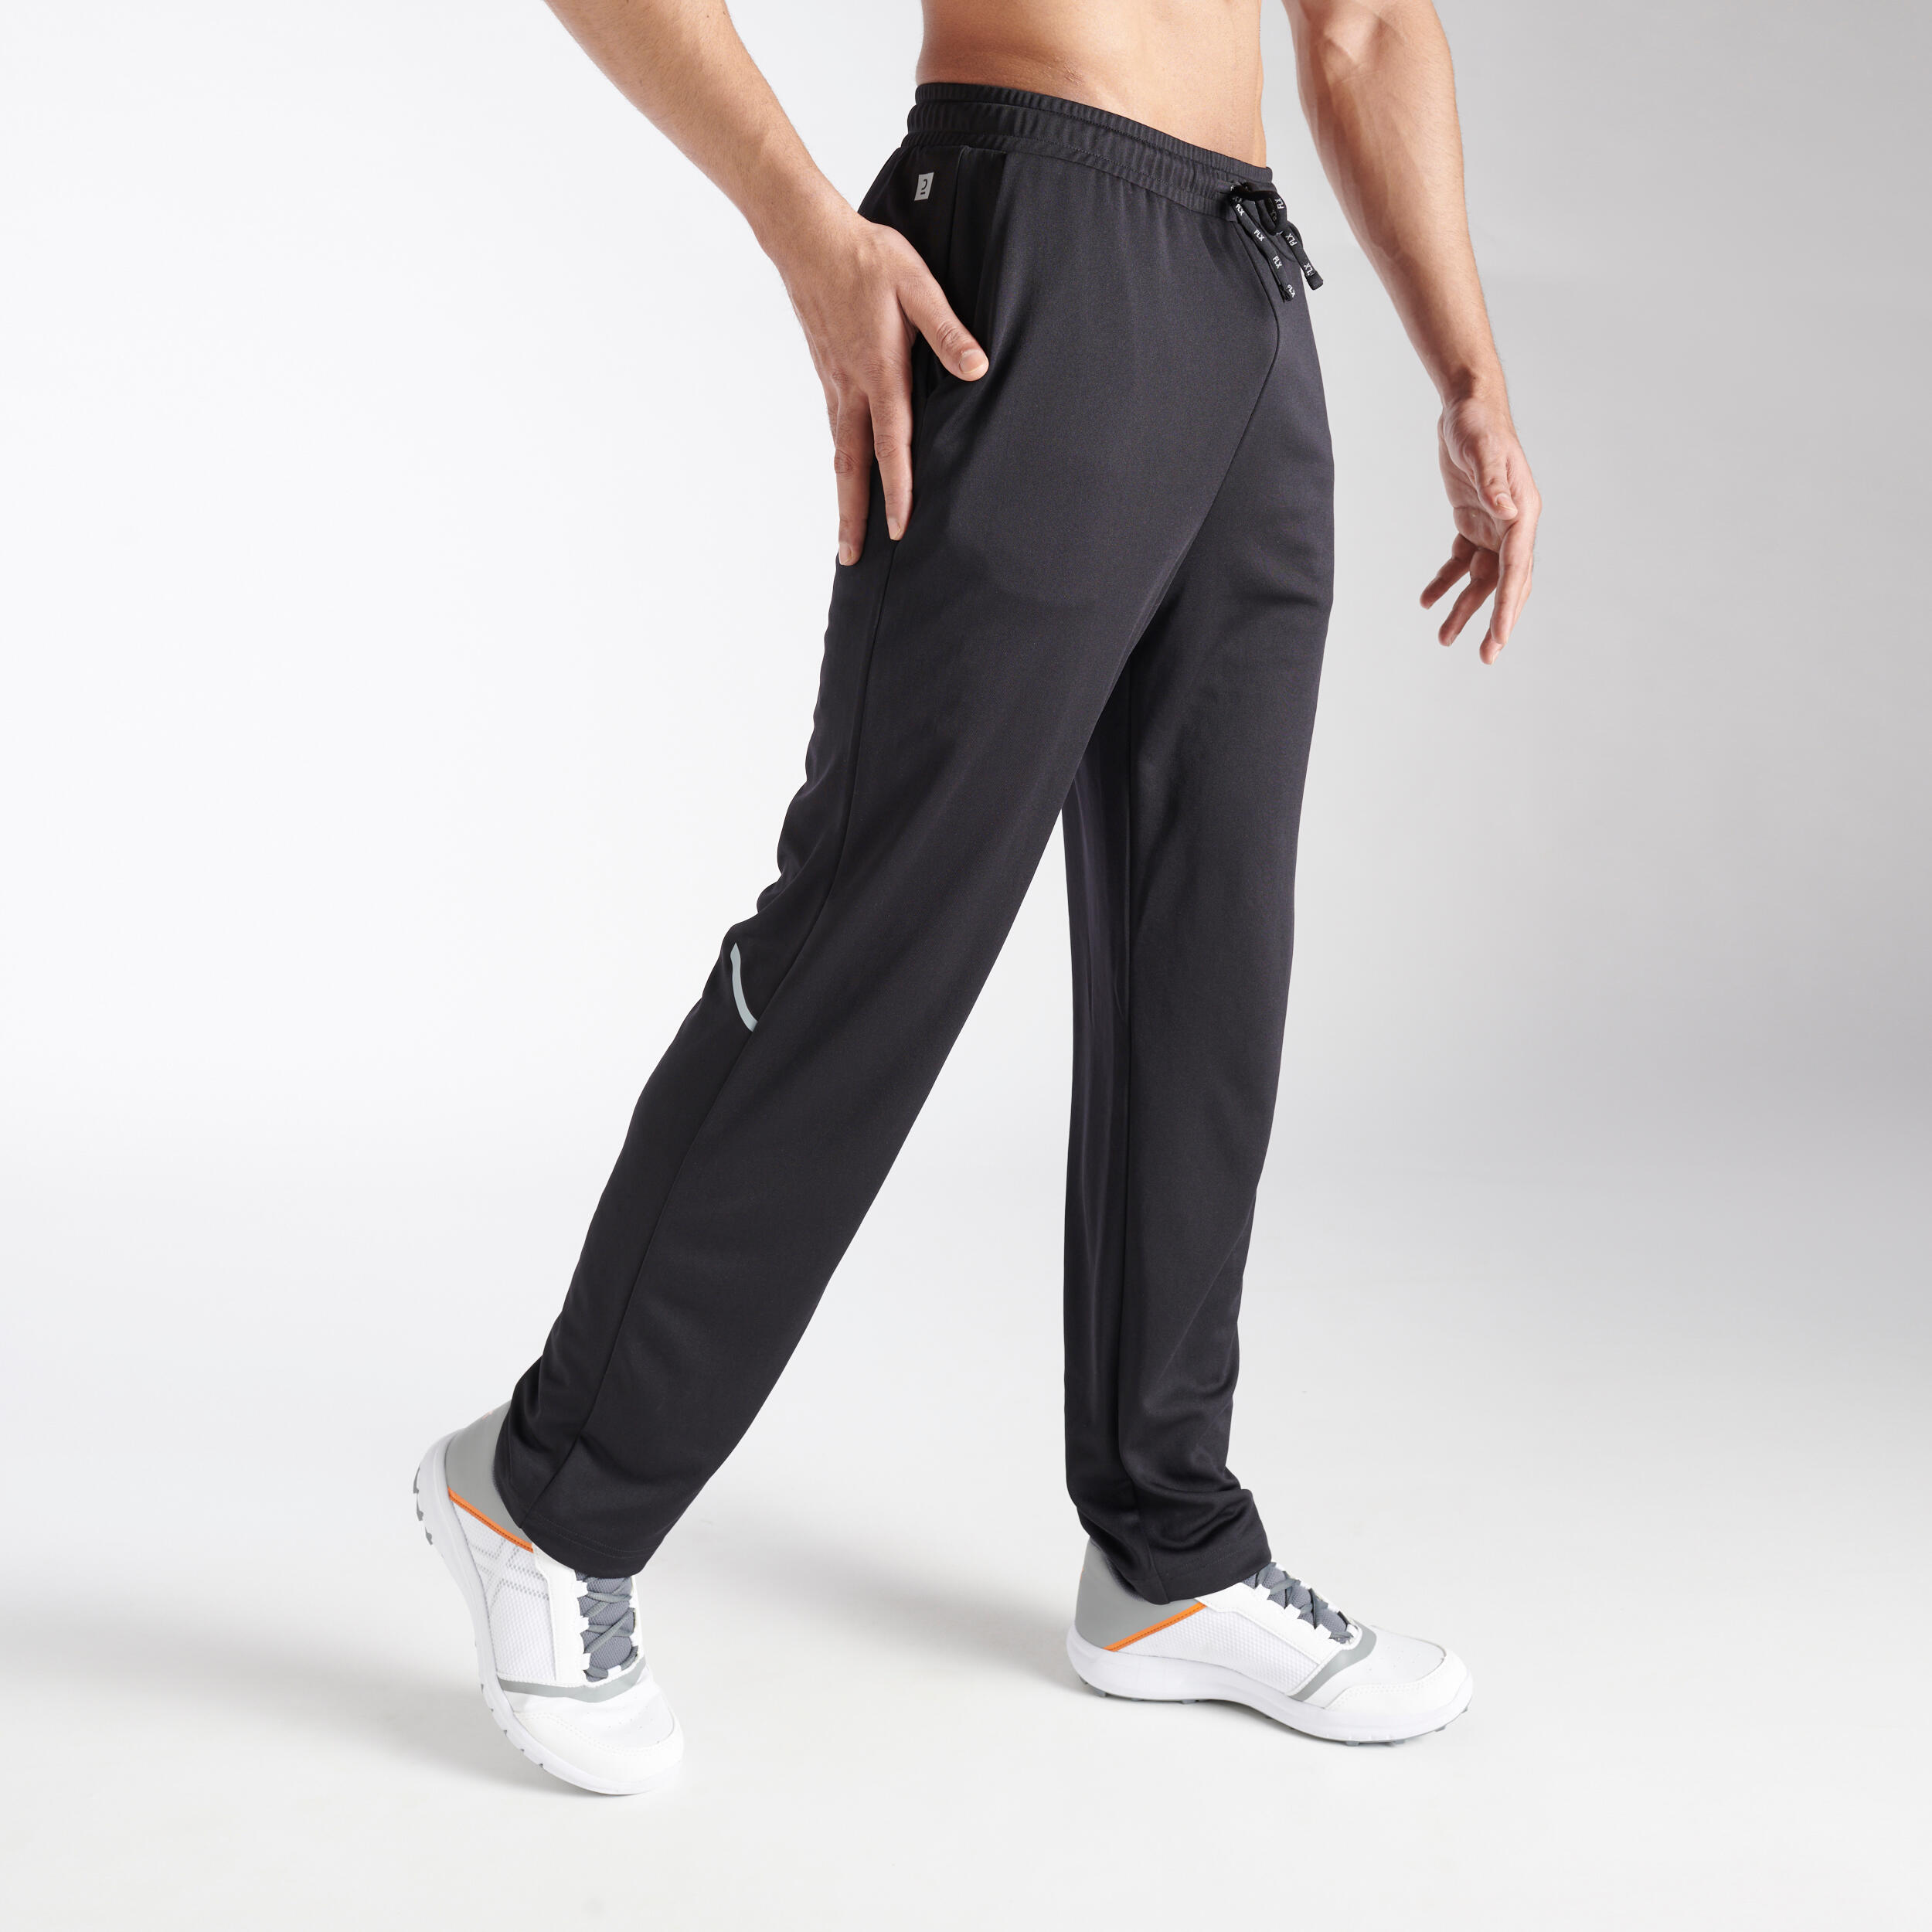 Cricket Track Trousers for Men  Cricket Team Player Pants Bottoms